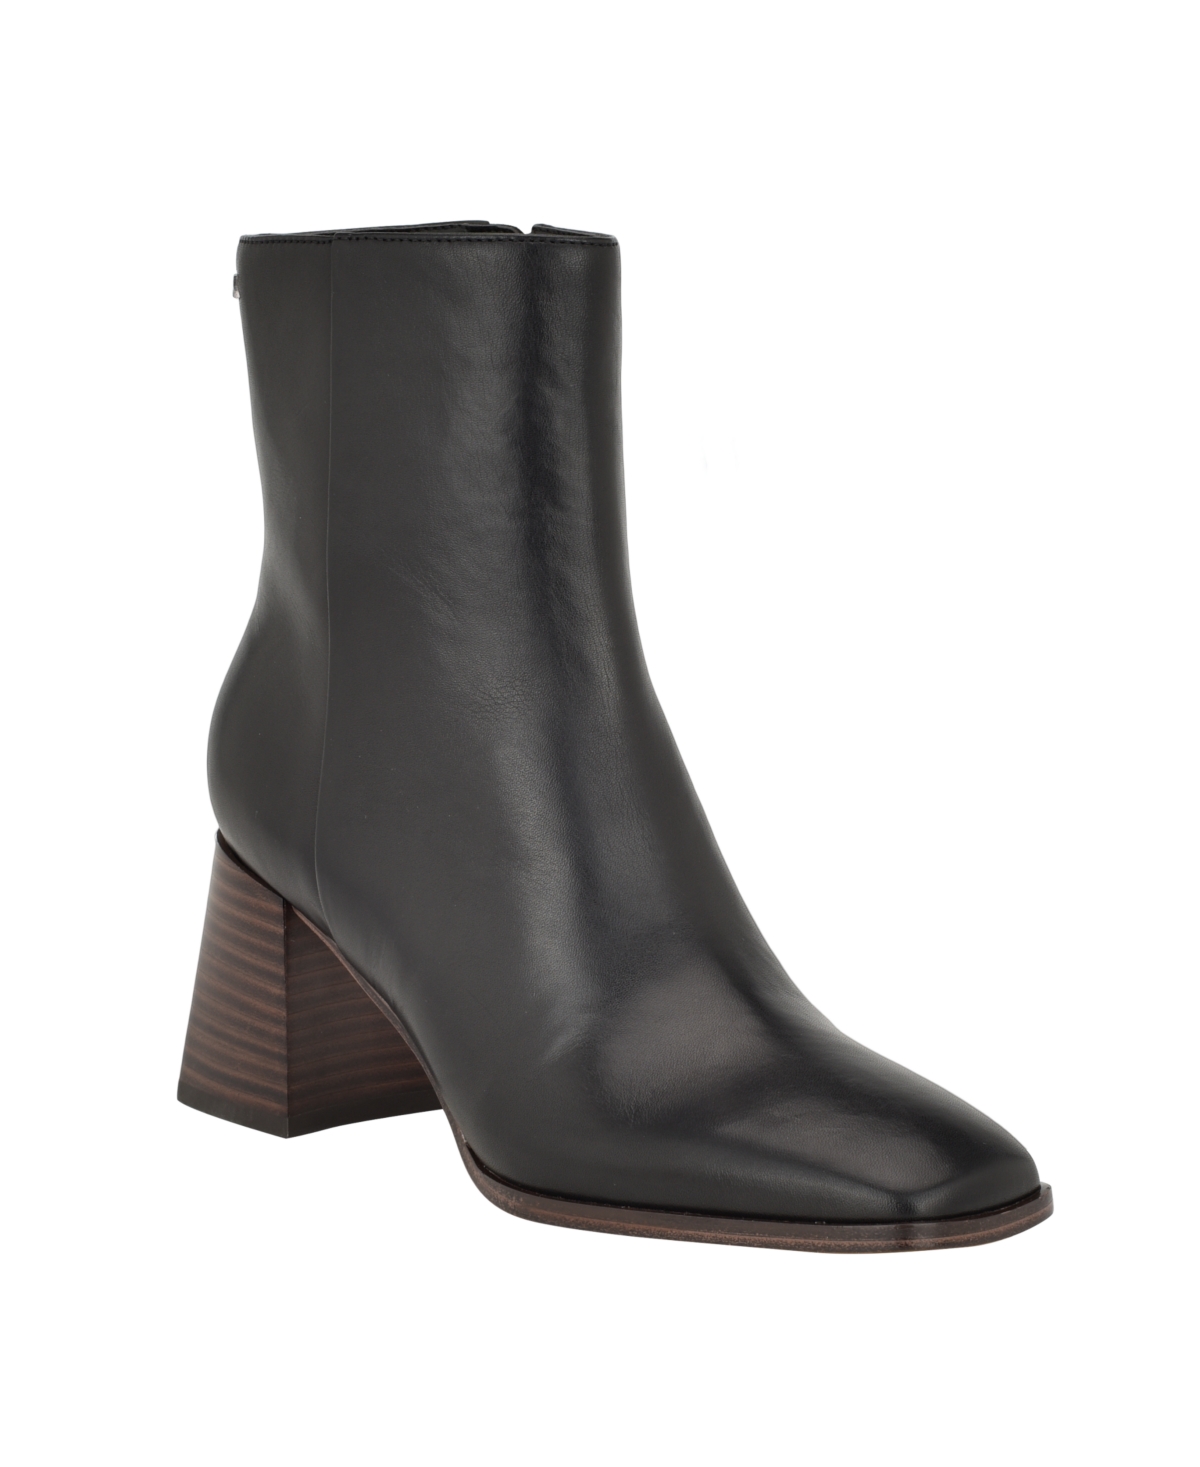 Calvin Klein Women's Broma Square Toe Tapered Heel Dress Booties In Black Leather